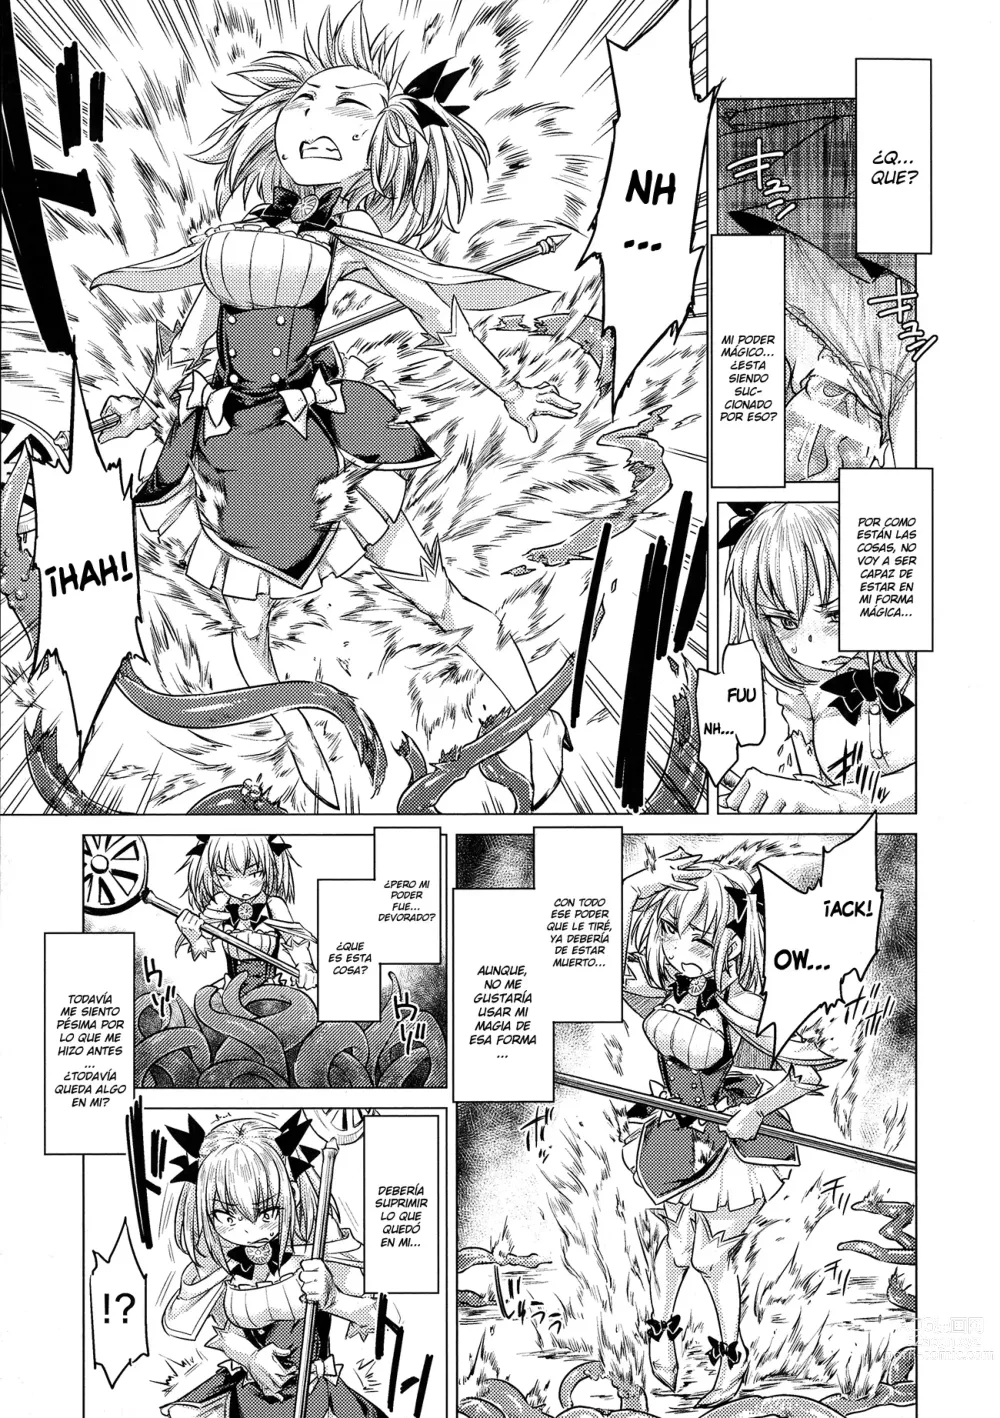 Page 7 of manga Tentacle Maiden